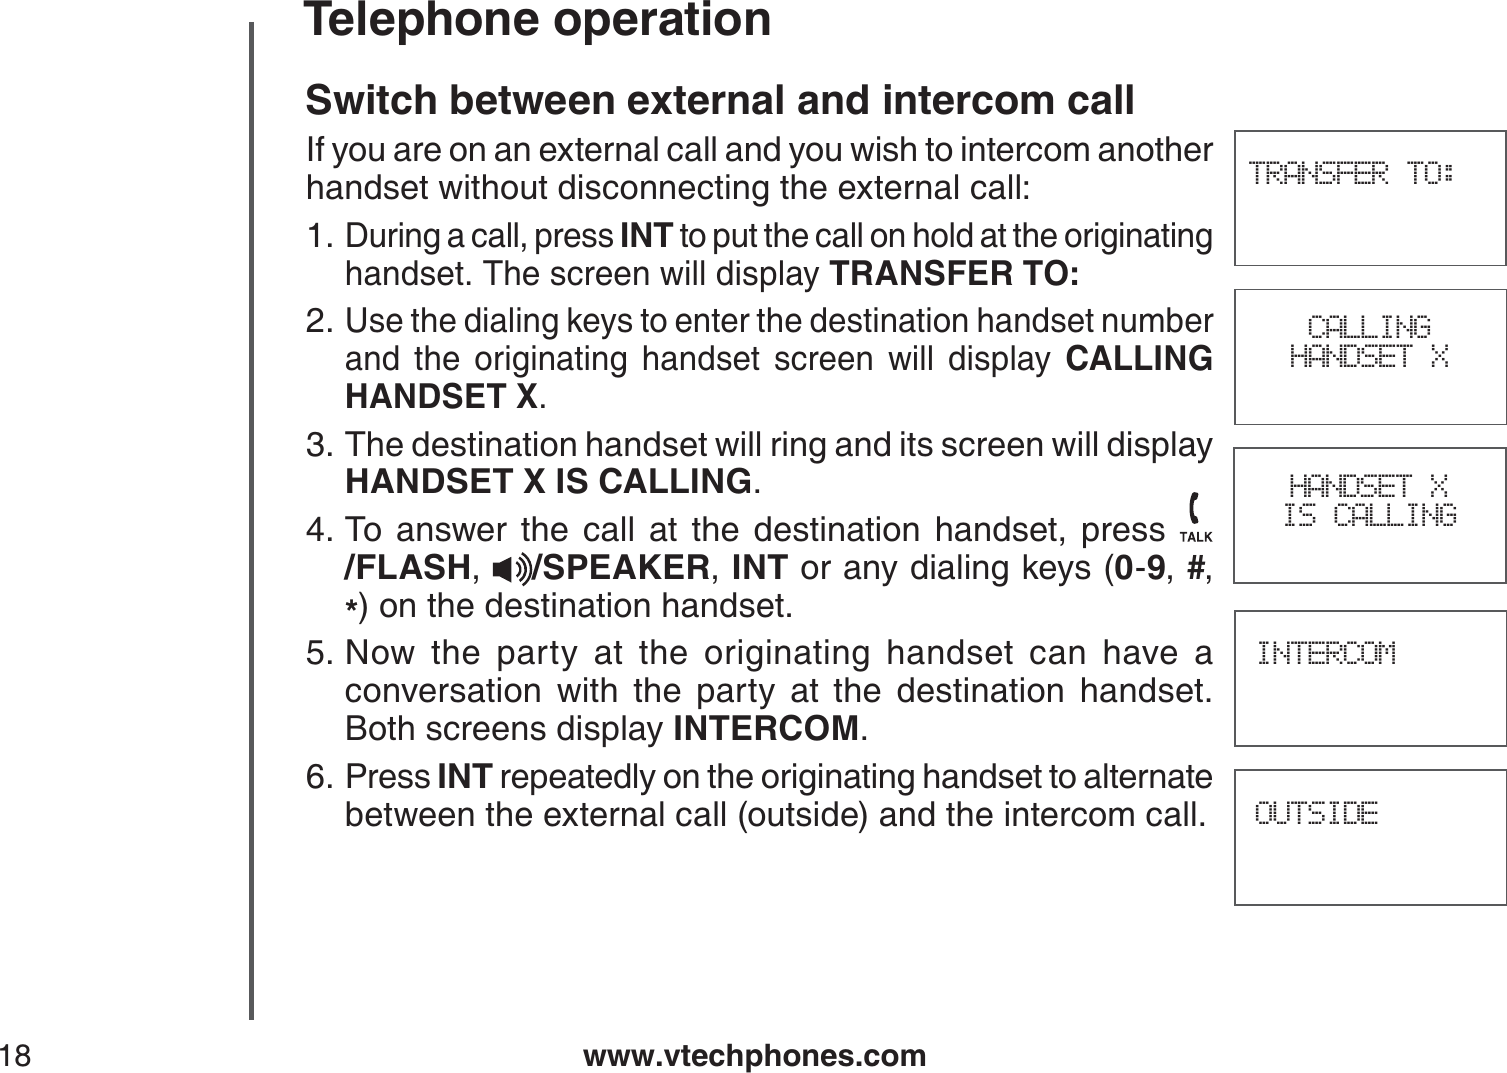 www.vtechphones.com18Telephone operationSwitch between external and intercom callIf you are on an external call and you wish to intercom another handset without disconnecting the external call:During a call, press INT to put the call on hold at the originating handset. The screen will display TRANSFER TO:Use the dialing keys to enter the destination handset number and the originating handset screen will display CALLING HANDSET X.The destination handset will ring and its screen will display HANDSET X IS CALLING.To answer the call at the destination handset, press /FLASH,/SPEAKER,INT or any dialing keys (0-9,#,*) on the destination handset.Now the party at the originating handset can have a conversation with the party at the destination handset. Both screens display INTERCOM.Press INT repeatedly on the originating handset to alternate between the external call (outside) and the intercom call.1.2.3.4.5.6.OUTSIDETRANSFER TO:HANDSET X IS CALLINGCALLINGHANDSET XINTERCOM